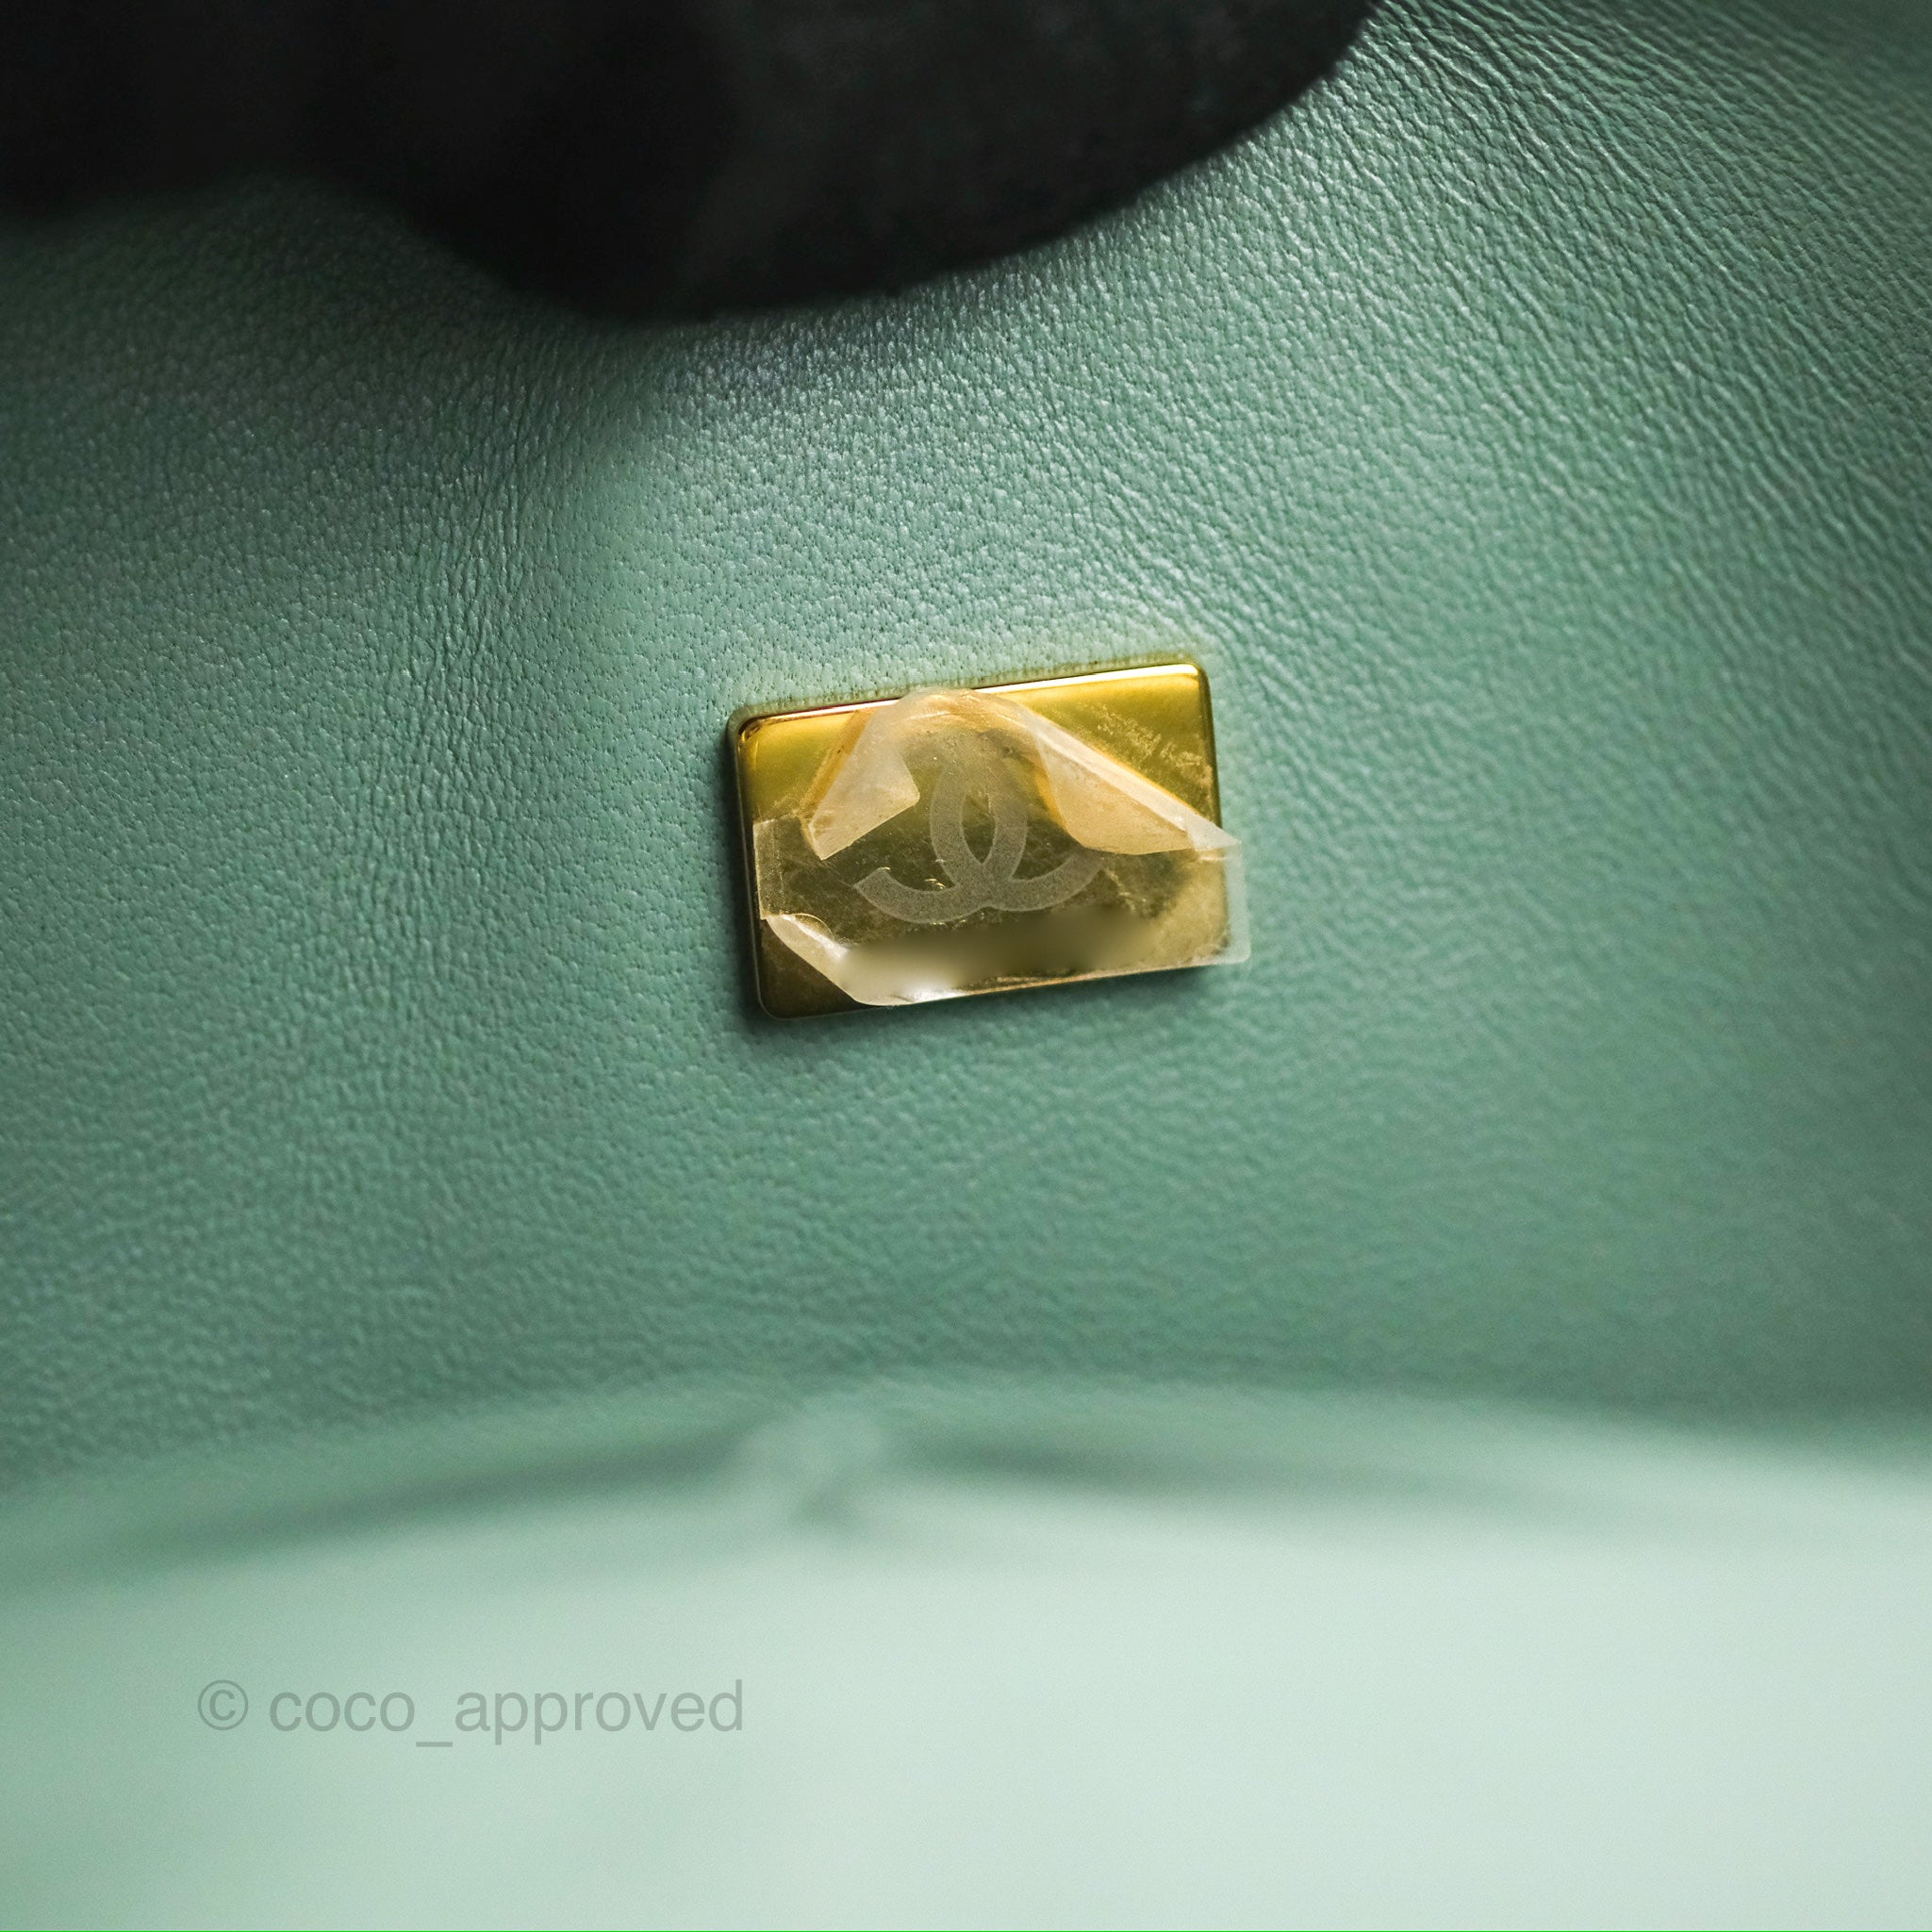 Chanel Classic M/L Medium Flap Quilted Tiffany Green Caviar Gold Hardw –  Coco Approved Studio